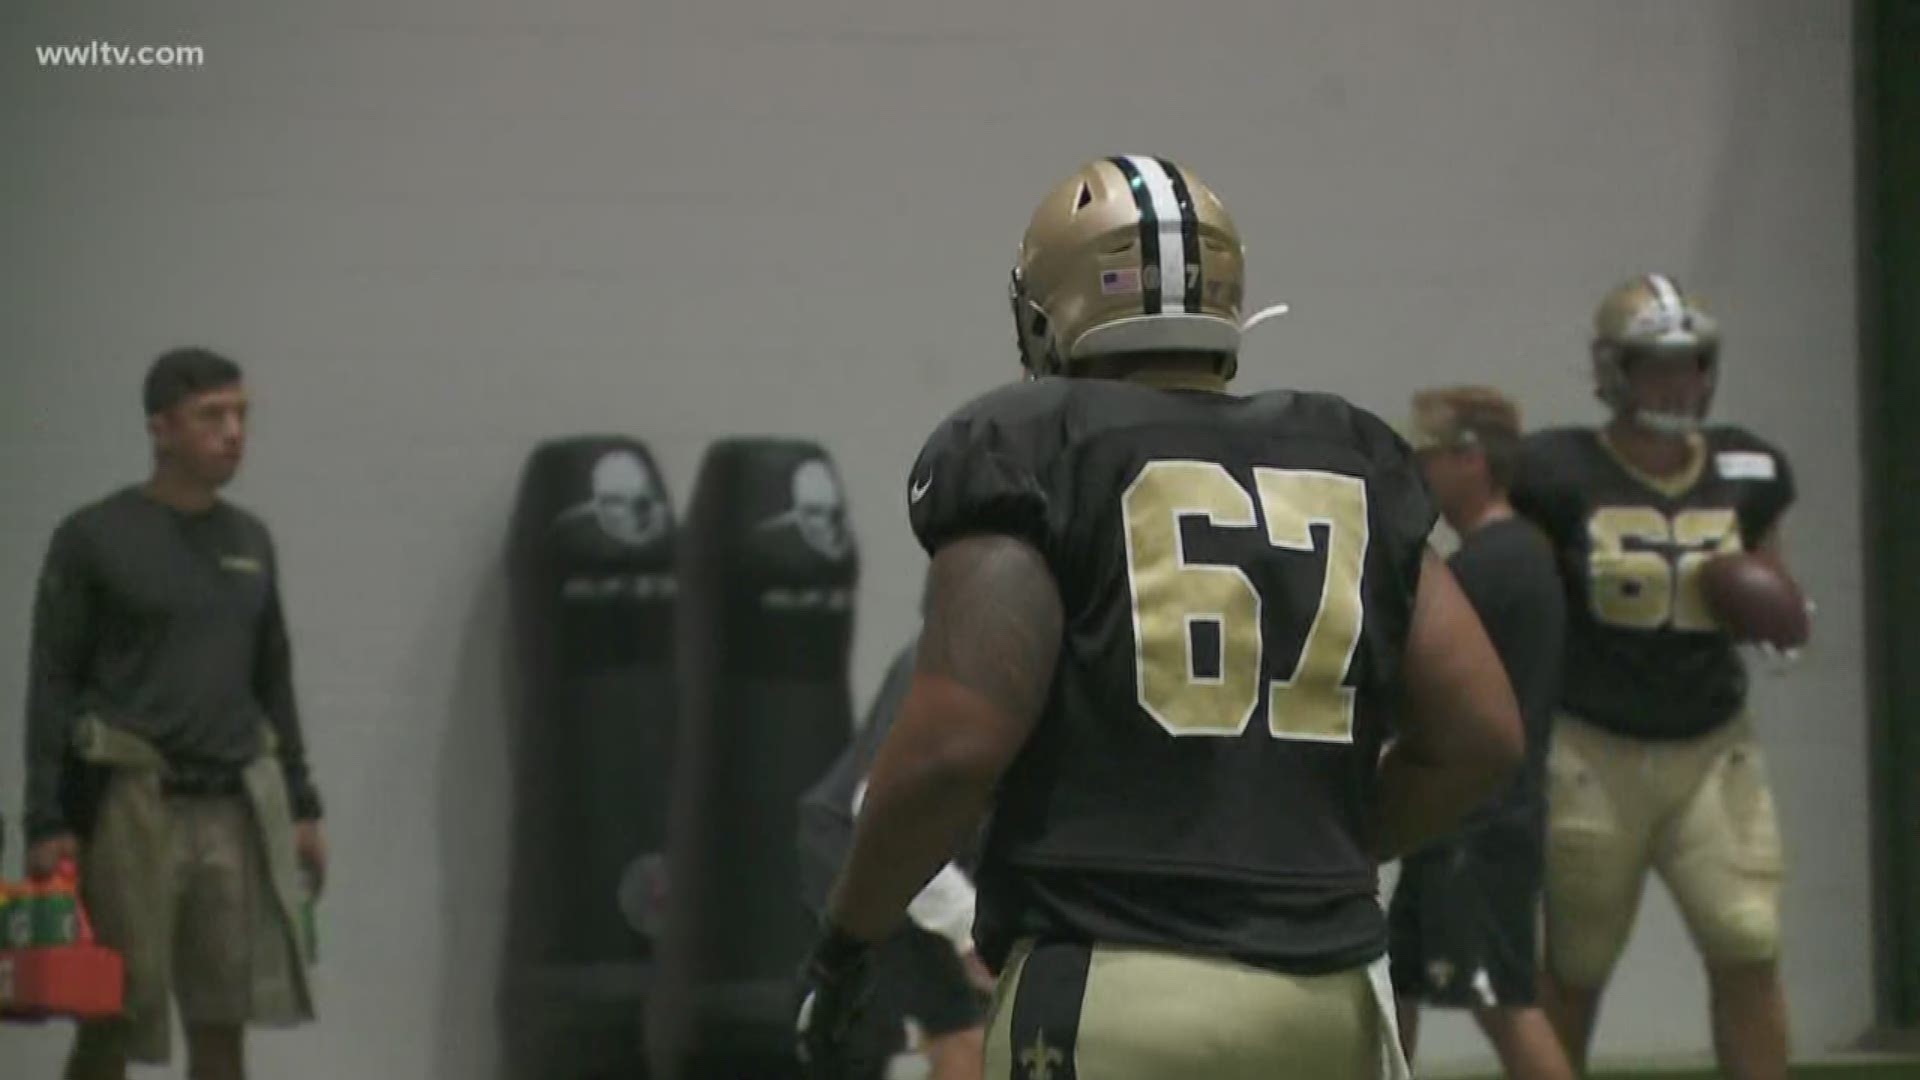 One of the New Orleans Saints' key cogs on the line, right guard Larry Warford, is working back to full strength after suffering an undisclosed injury at the beginning of last season.